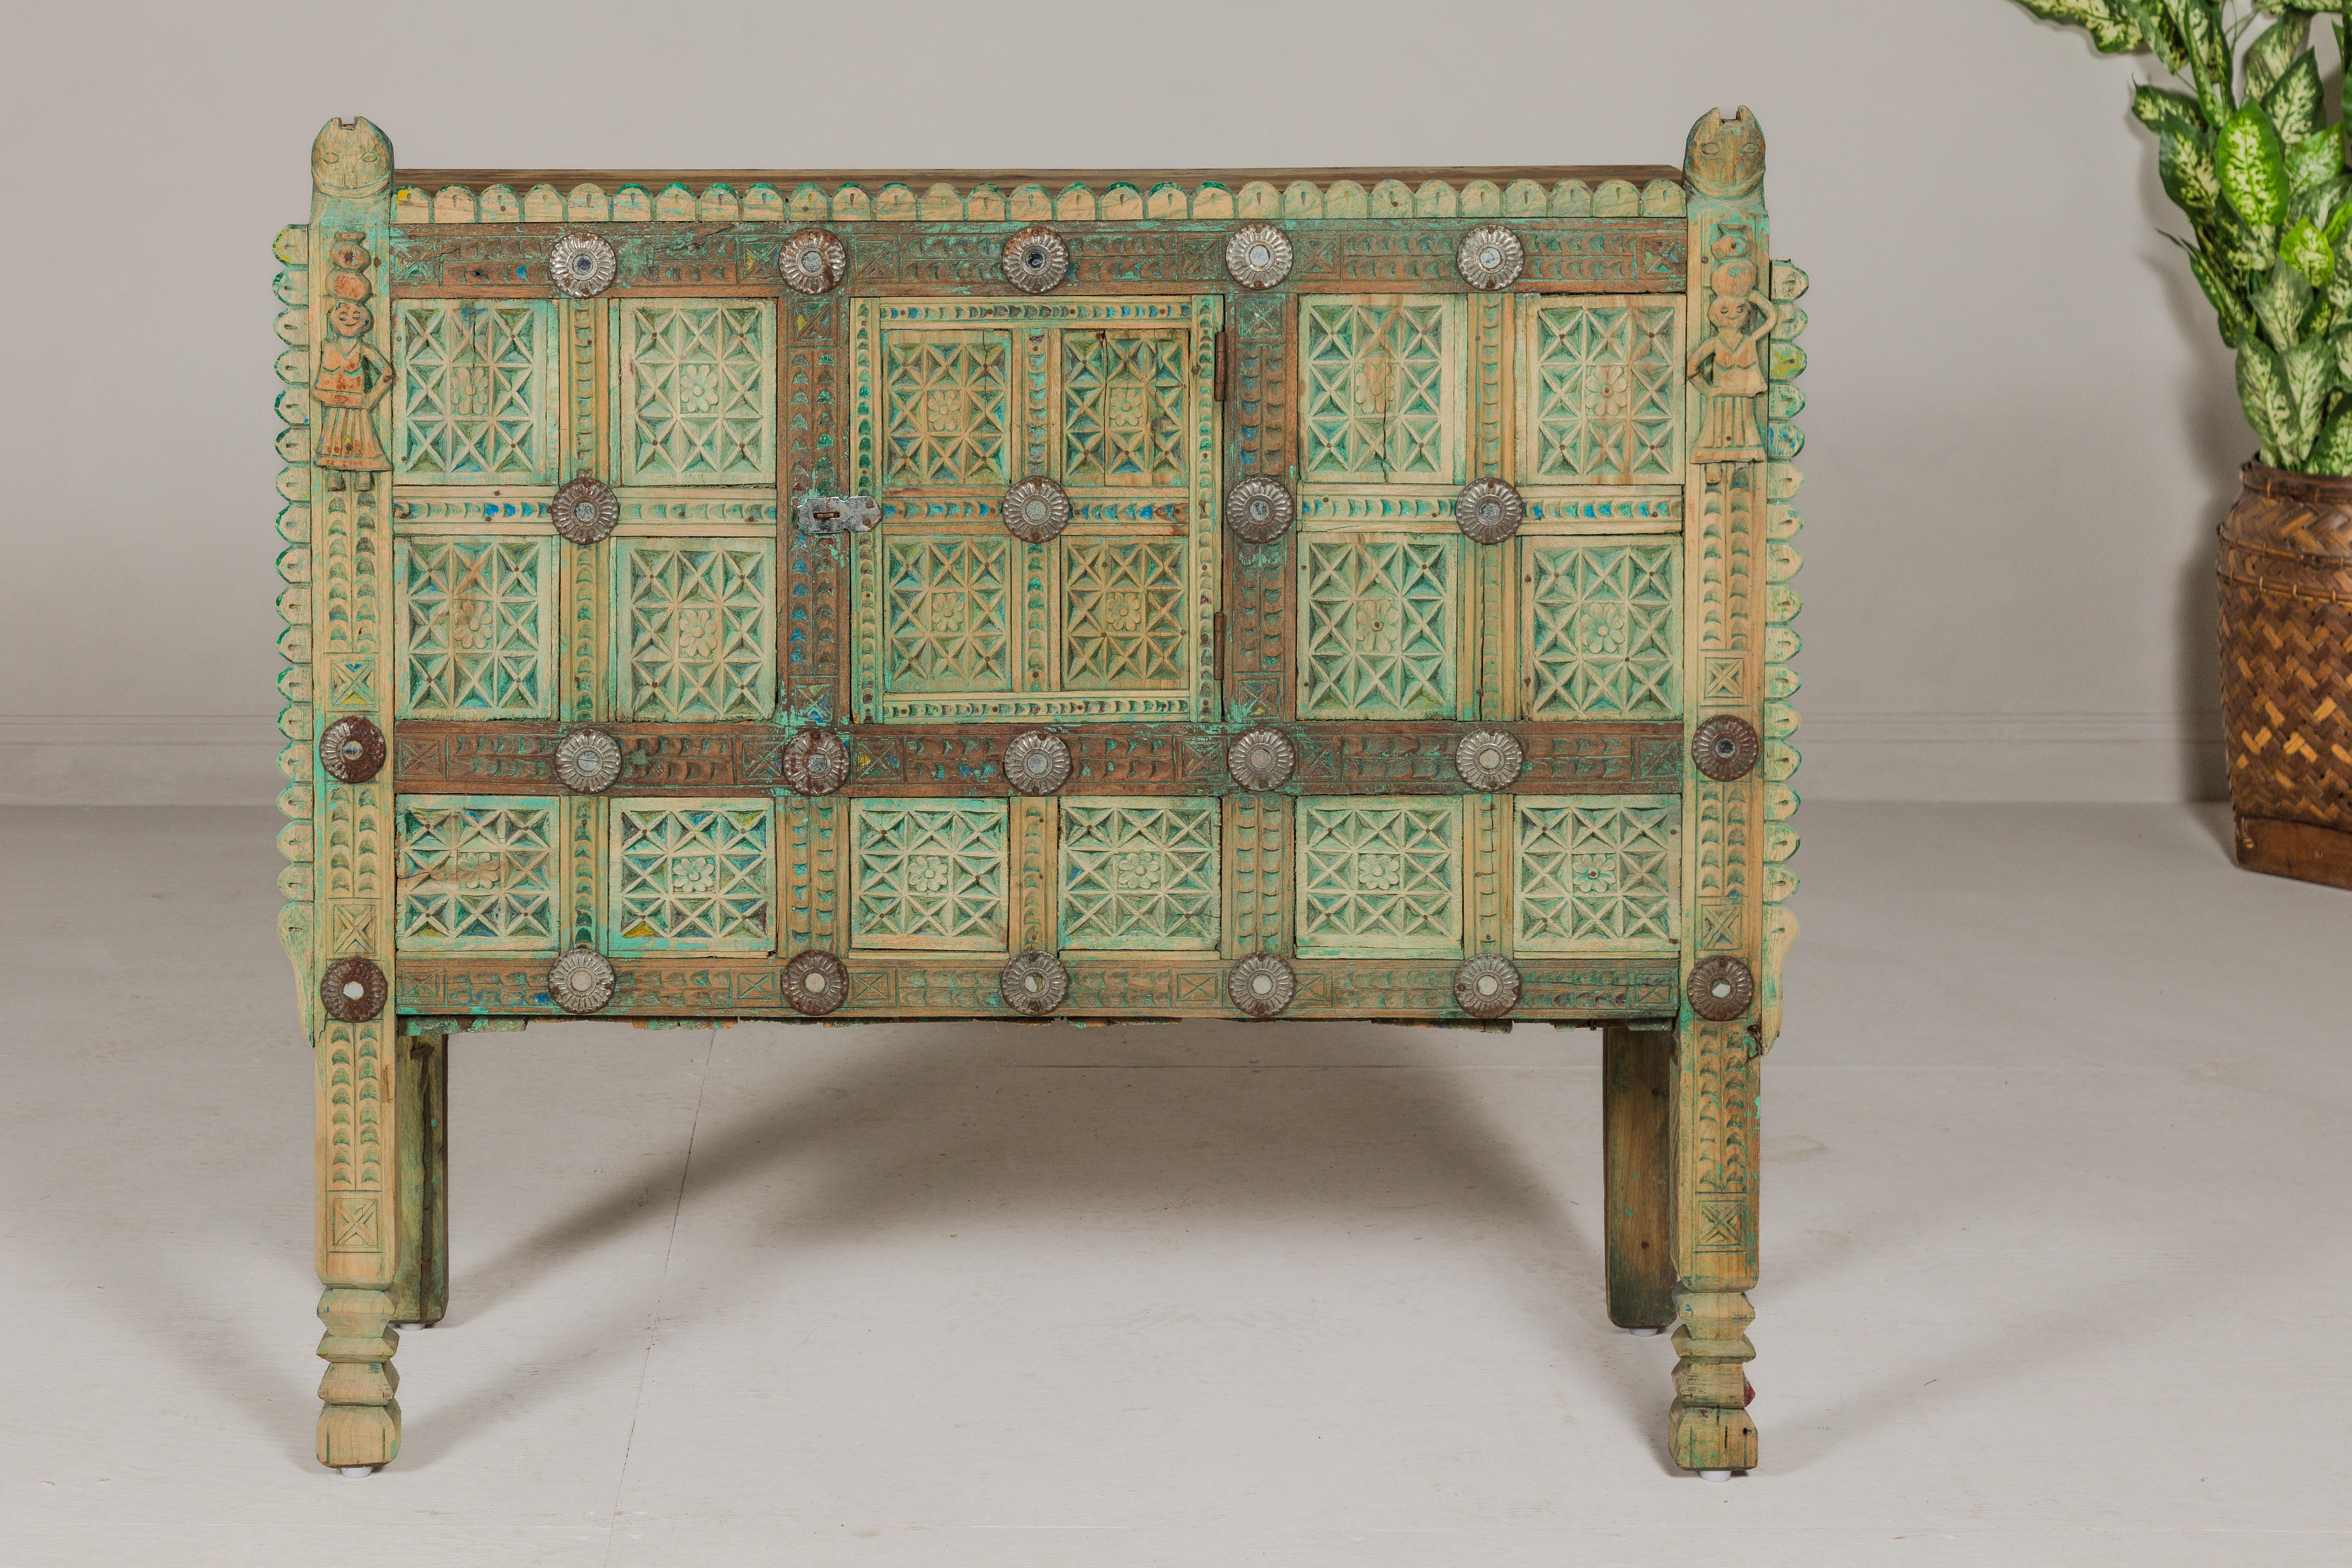 An Indian green painted Damachiya wedding cabinet on legs from the 19th century, with abundant carved décor. This 19th-century Indian Damachiya wedding cabinet, resplendent in a soft green paint, is a captivating piece of cultural heritage and